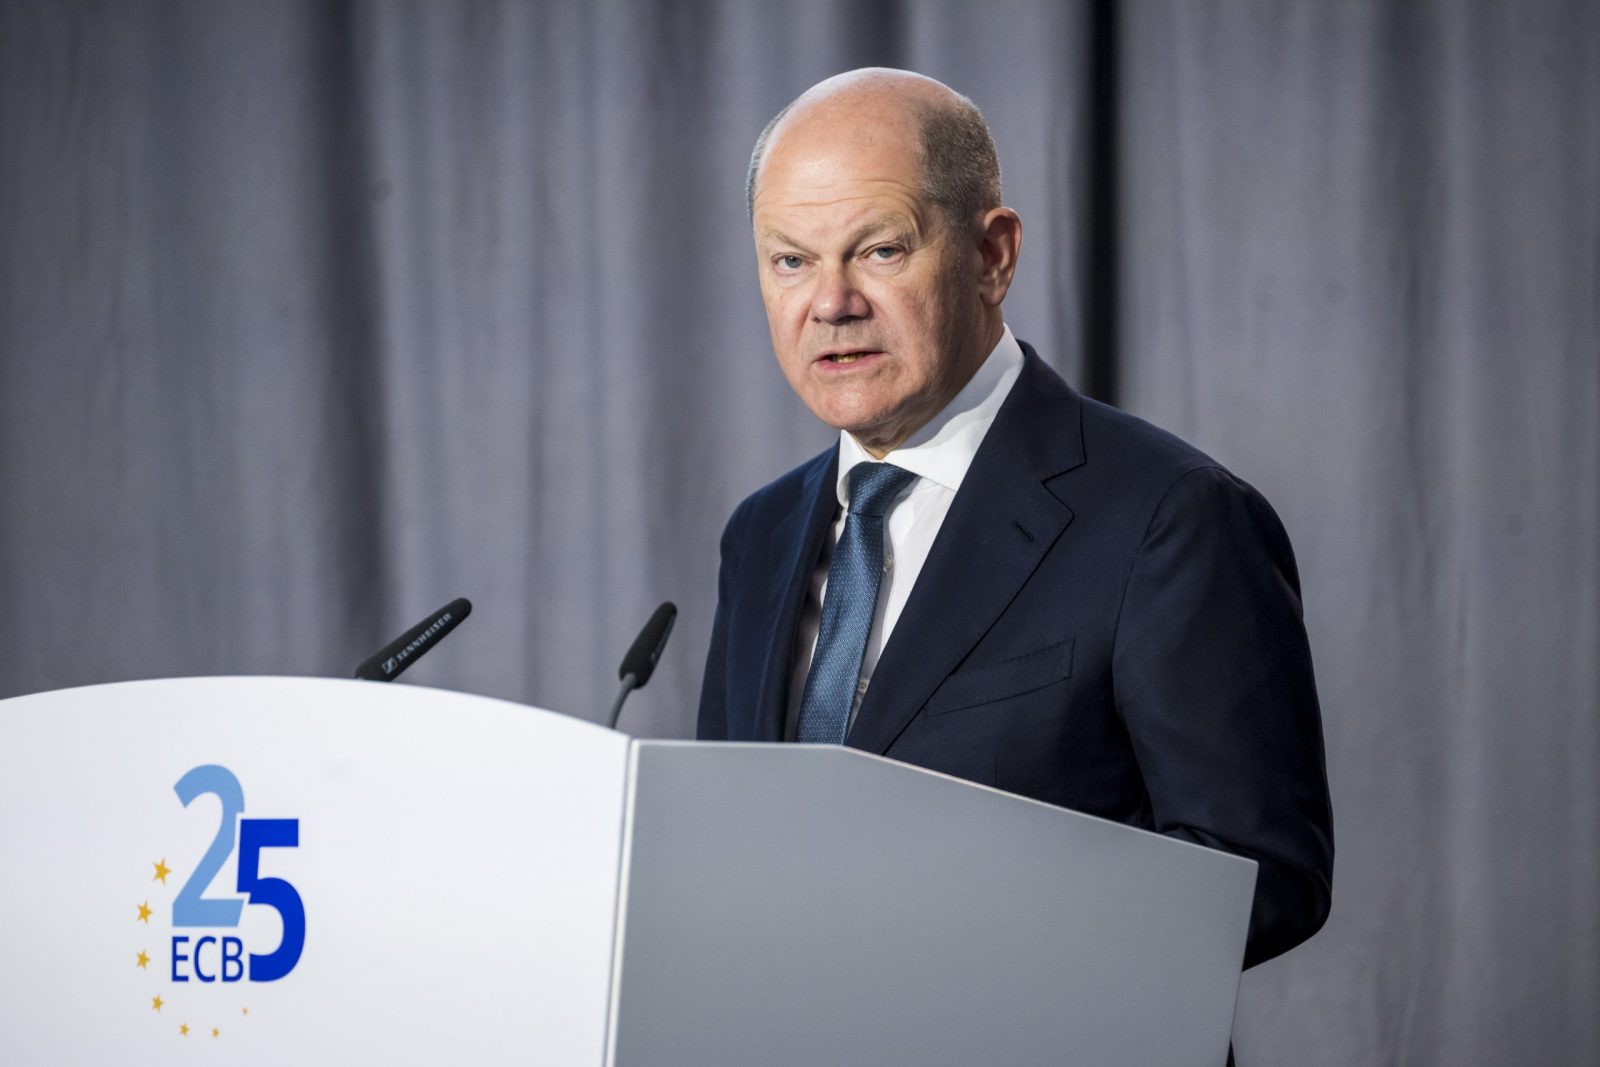 epa10651171 German Cancellor Olaf Scholz speaks during the celebrations of the 25th anniversary of the European Central Bank (ECB) in Frankfurt, Germany, 24 May 2023. The ECB began work in 1998 in preparation for the introduction of Europe's single currency, the Euro, which took place a year later.  EPA/THOMAS LOHNES / POOL